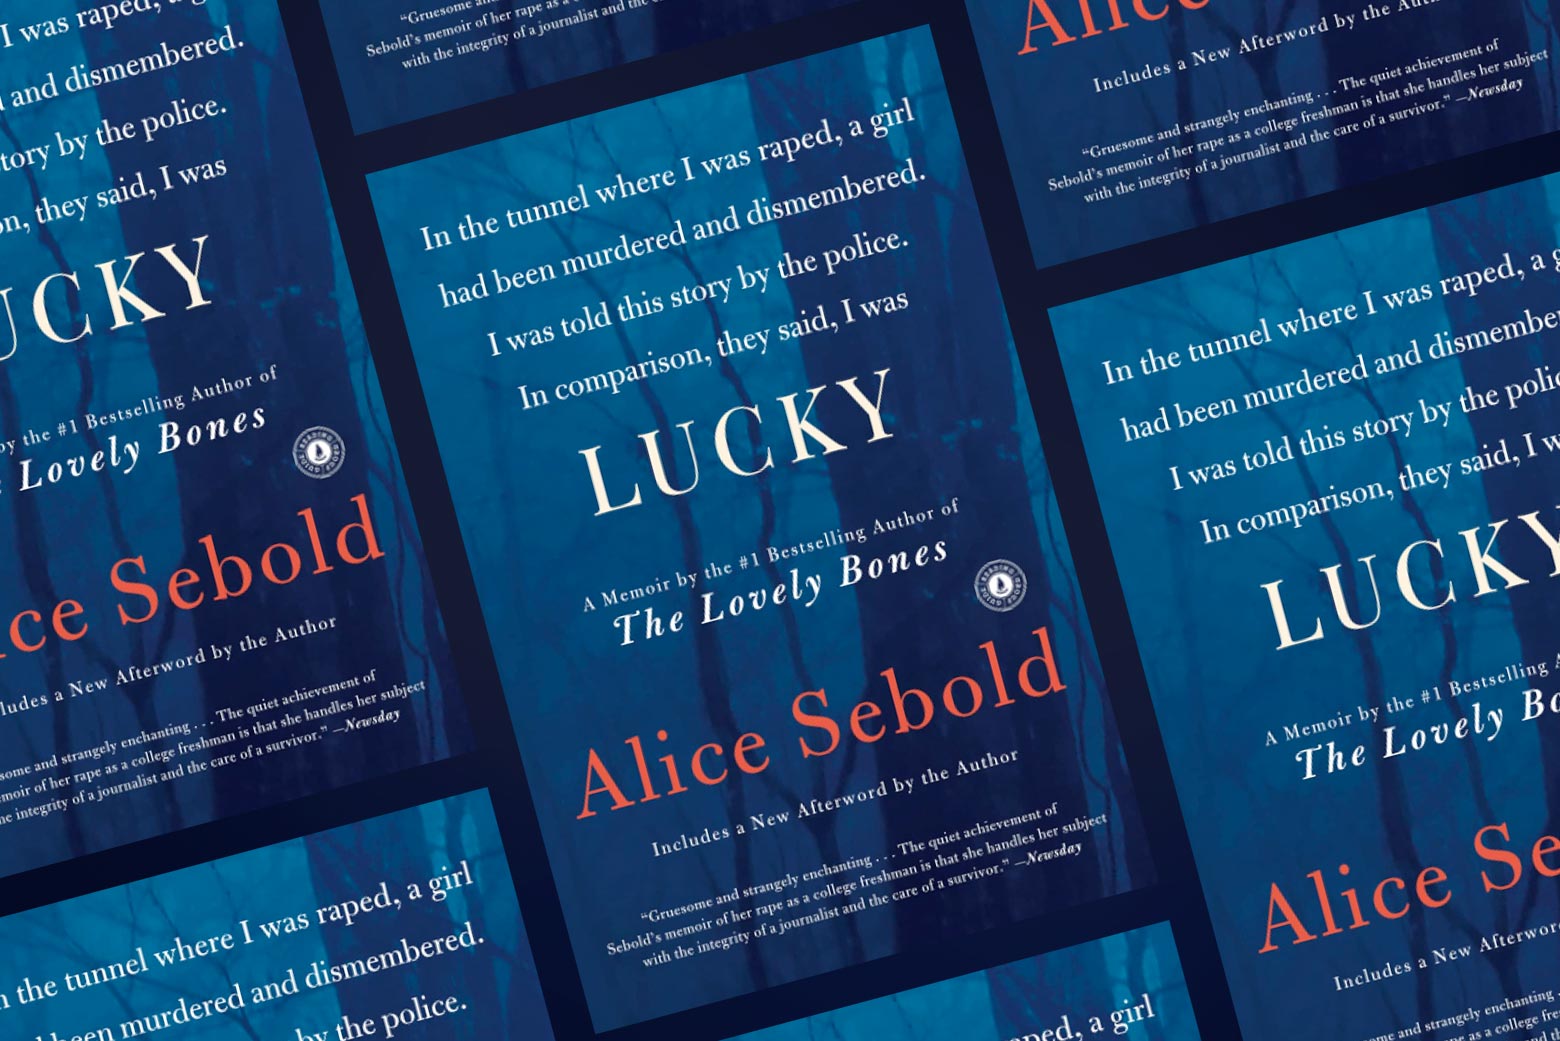 Lucky, Alice Sebolds memoir about her rape, is even more brutal to read now that Anthony Broadwater has been exonerated.